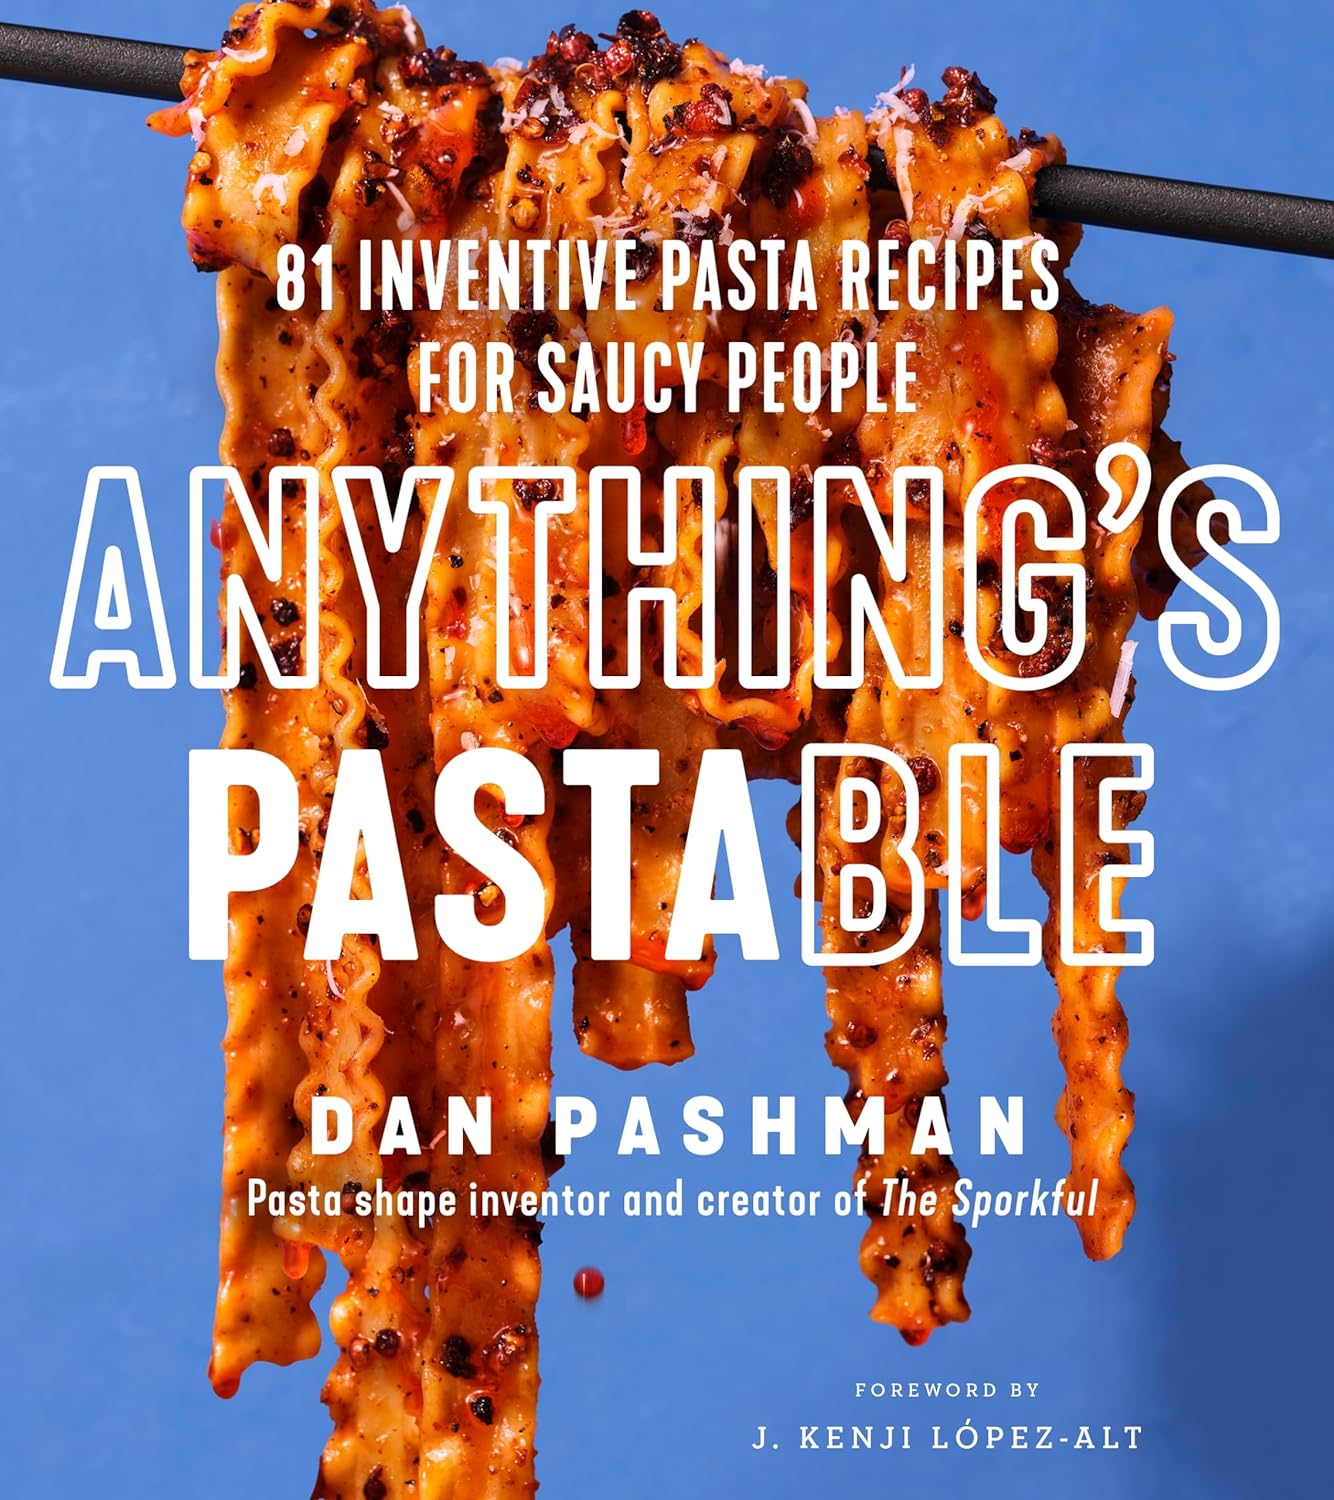 Anything's Pastable: 81 Inventive Pasta Recipes for Saucy People (Dan Pashman) *Signed*